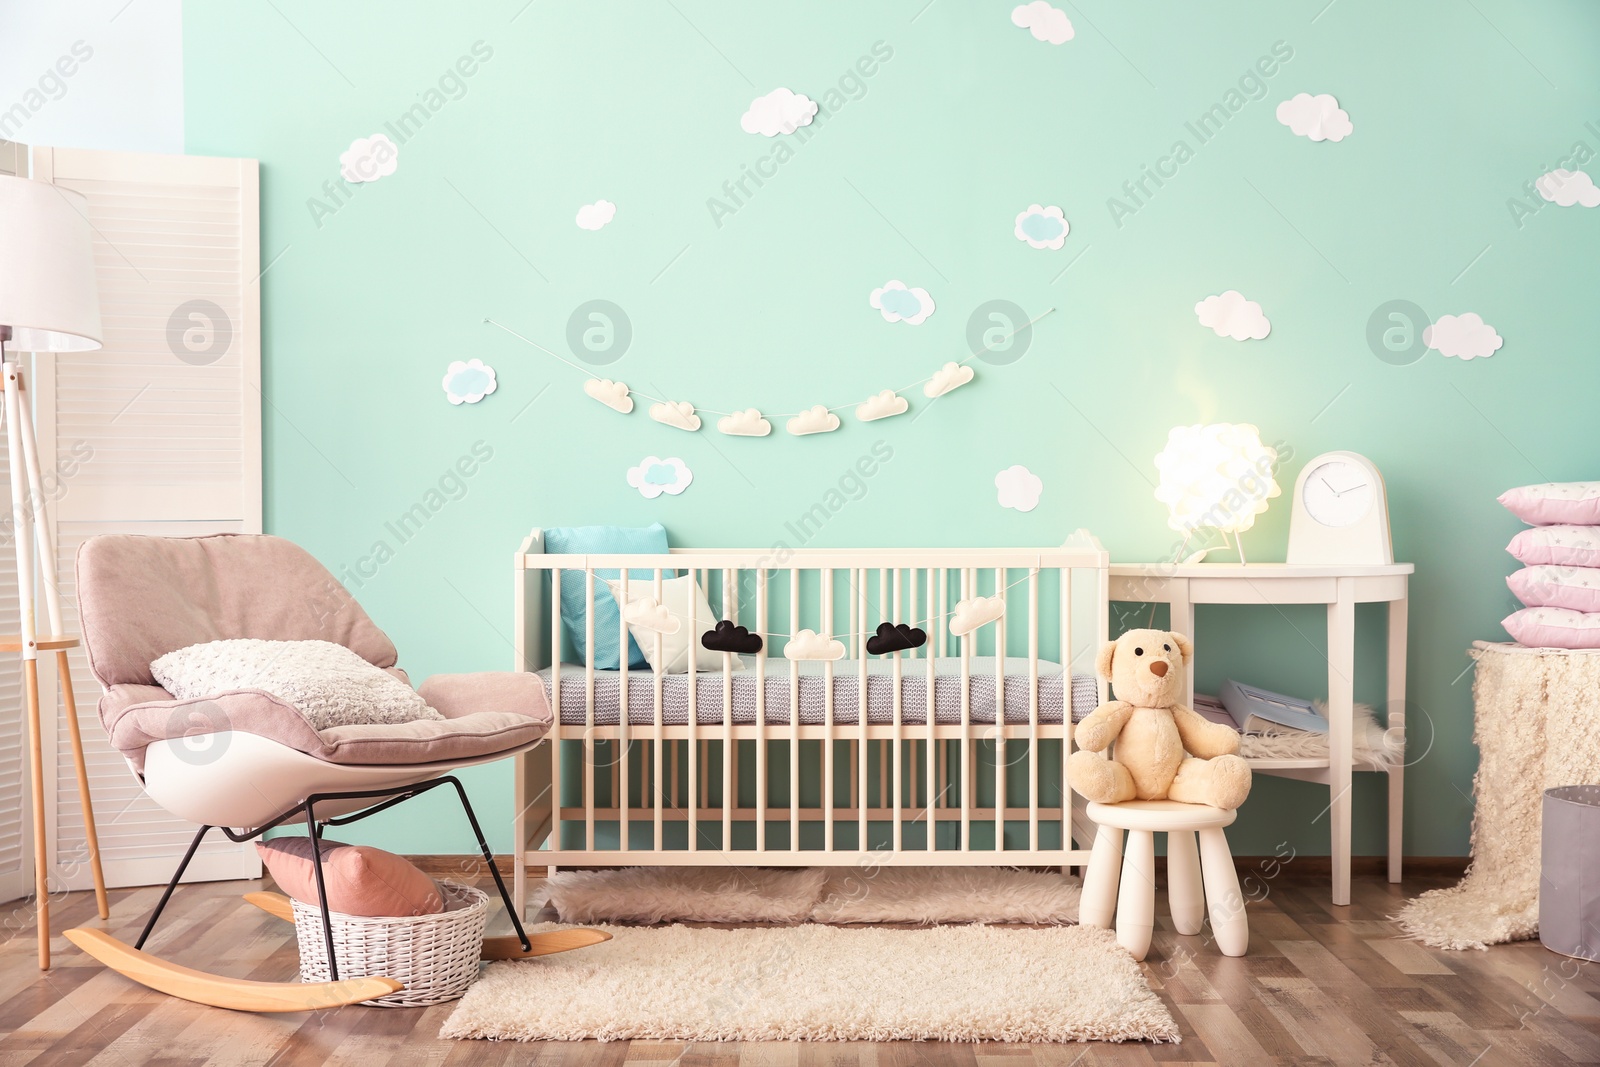 Photo of Modern baby room interior with crib and rocking chair